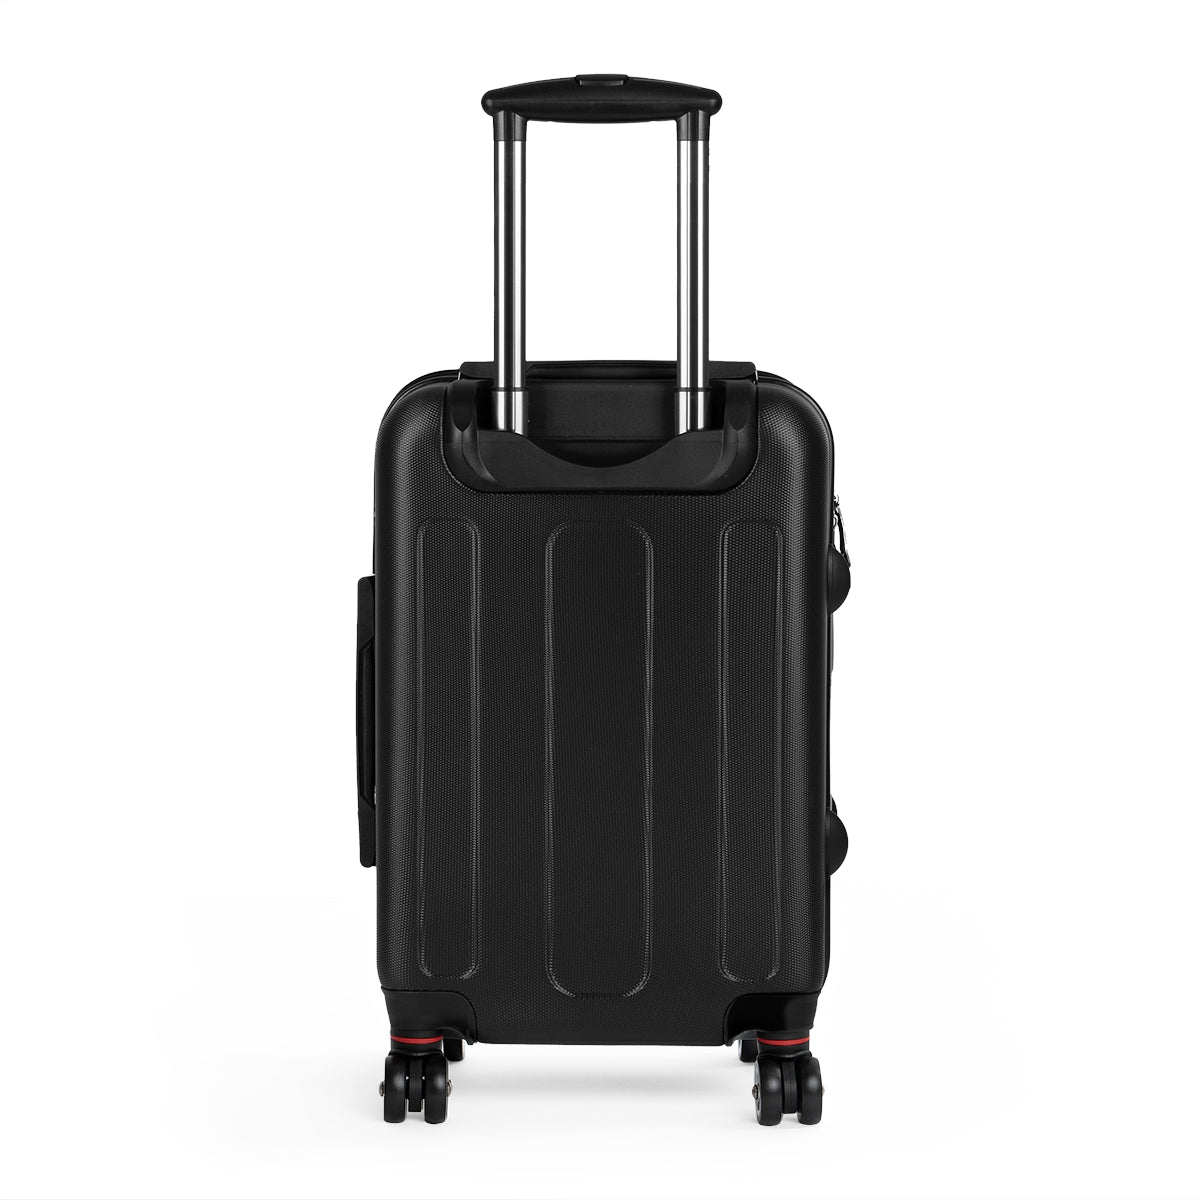 Getrott Hole Live Through This 1994 Black Cabin Suitcase Inner Pockets Extended Storage Adjustable Telescopic Handle Inner Pockets Double wheeled Polycarbonate Hard-shell Built-in Lock